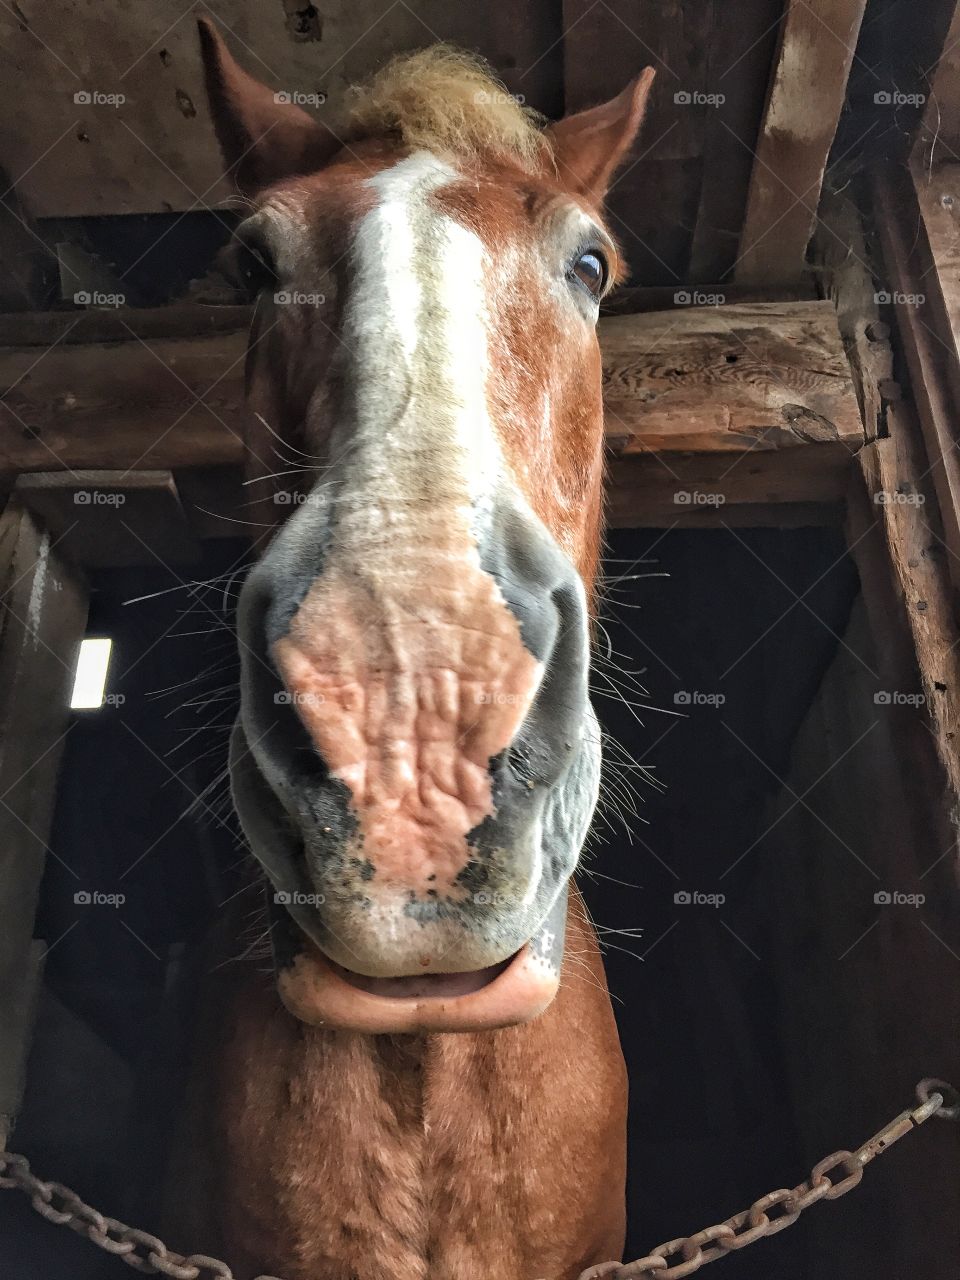 why the long face?